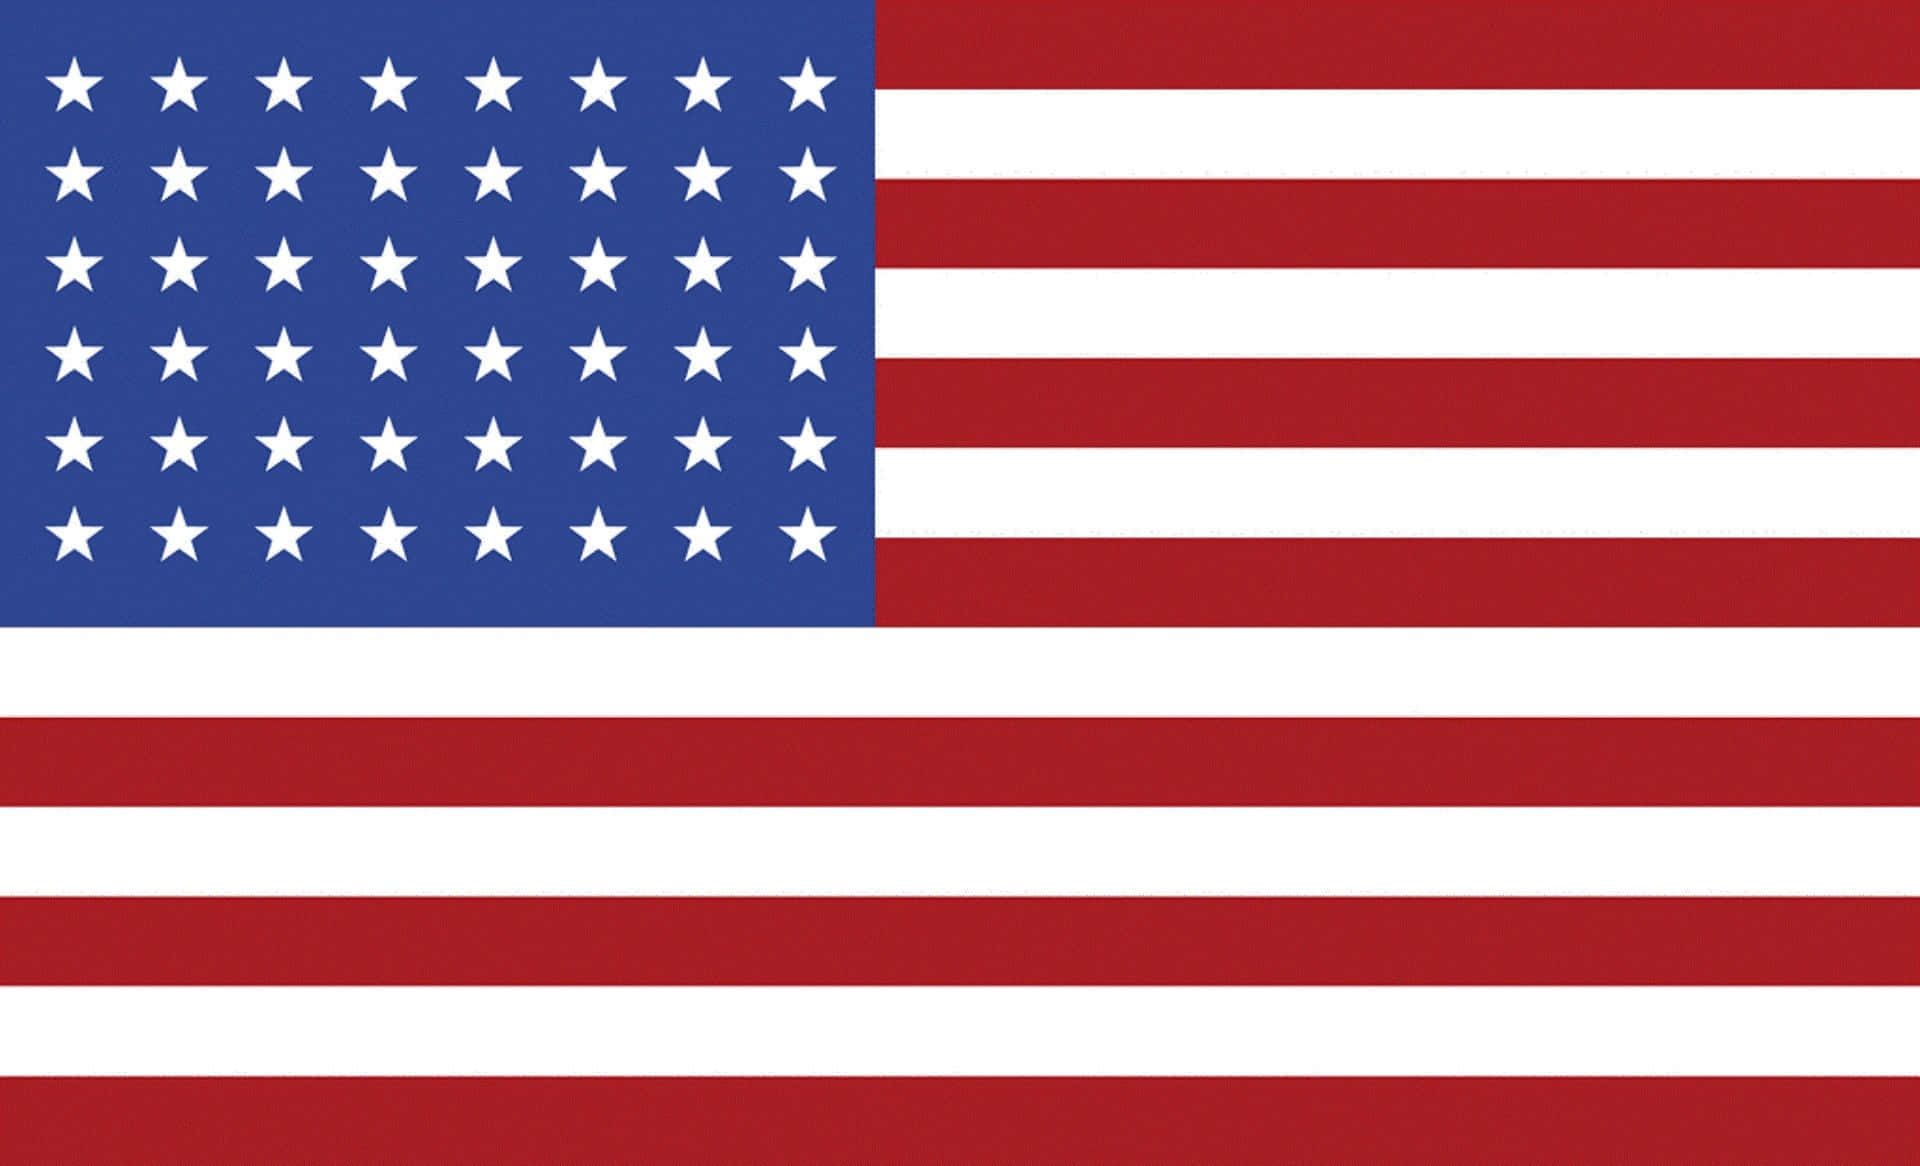 The Stars&Stripes: An American Tradition